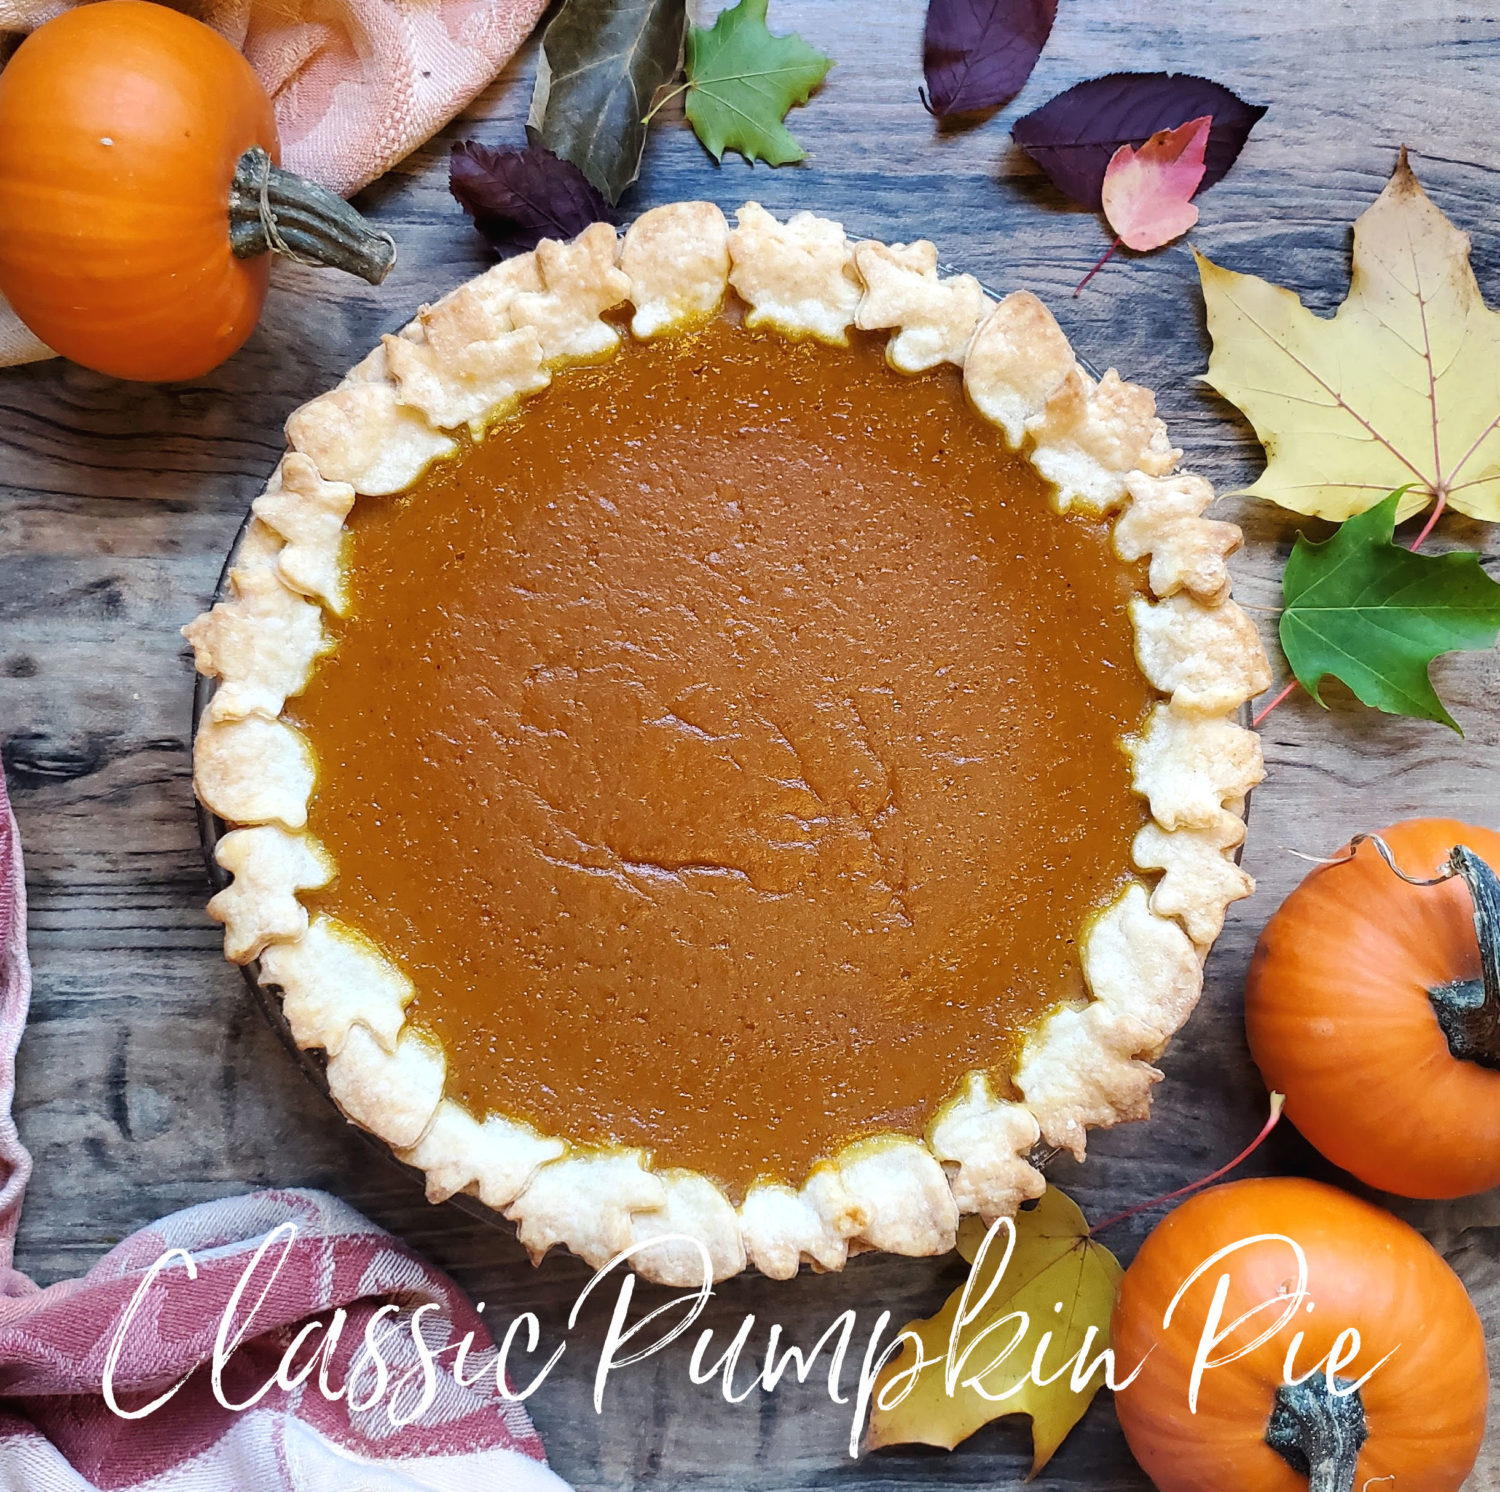 Jazz up your pumpkin pie game with a new spice (mace), more eggs, and you never have to worry about not having evaporated milk on hand again.